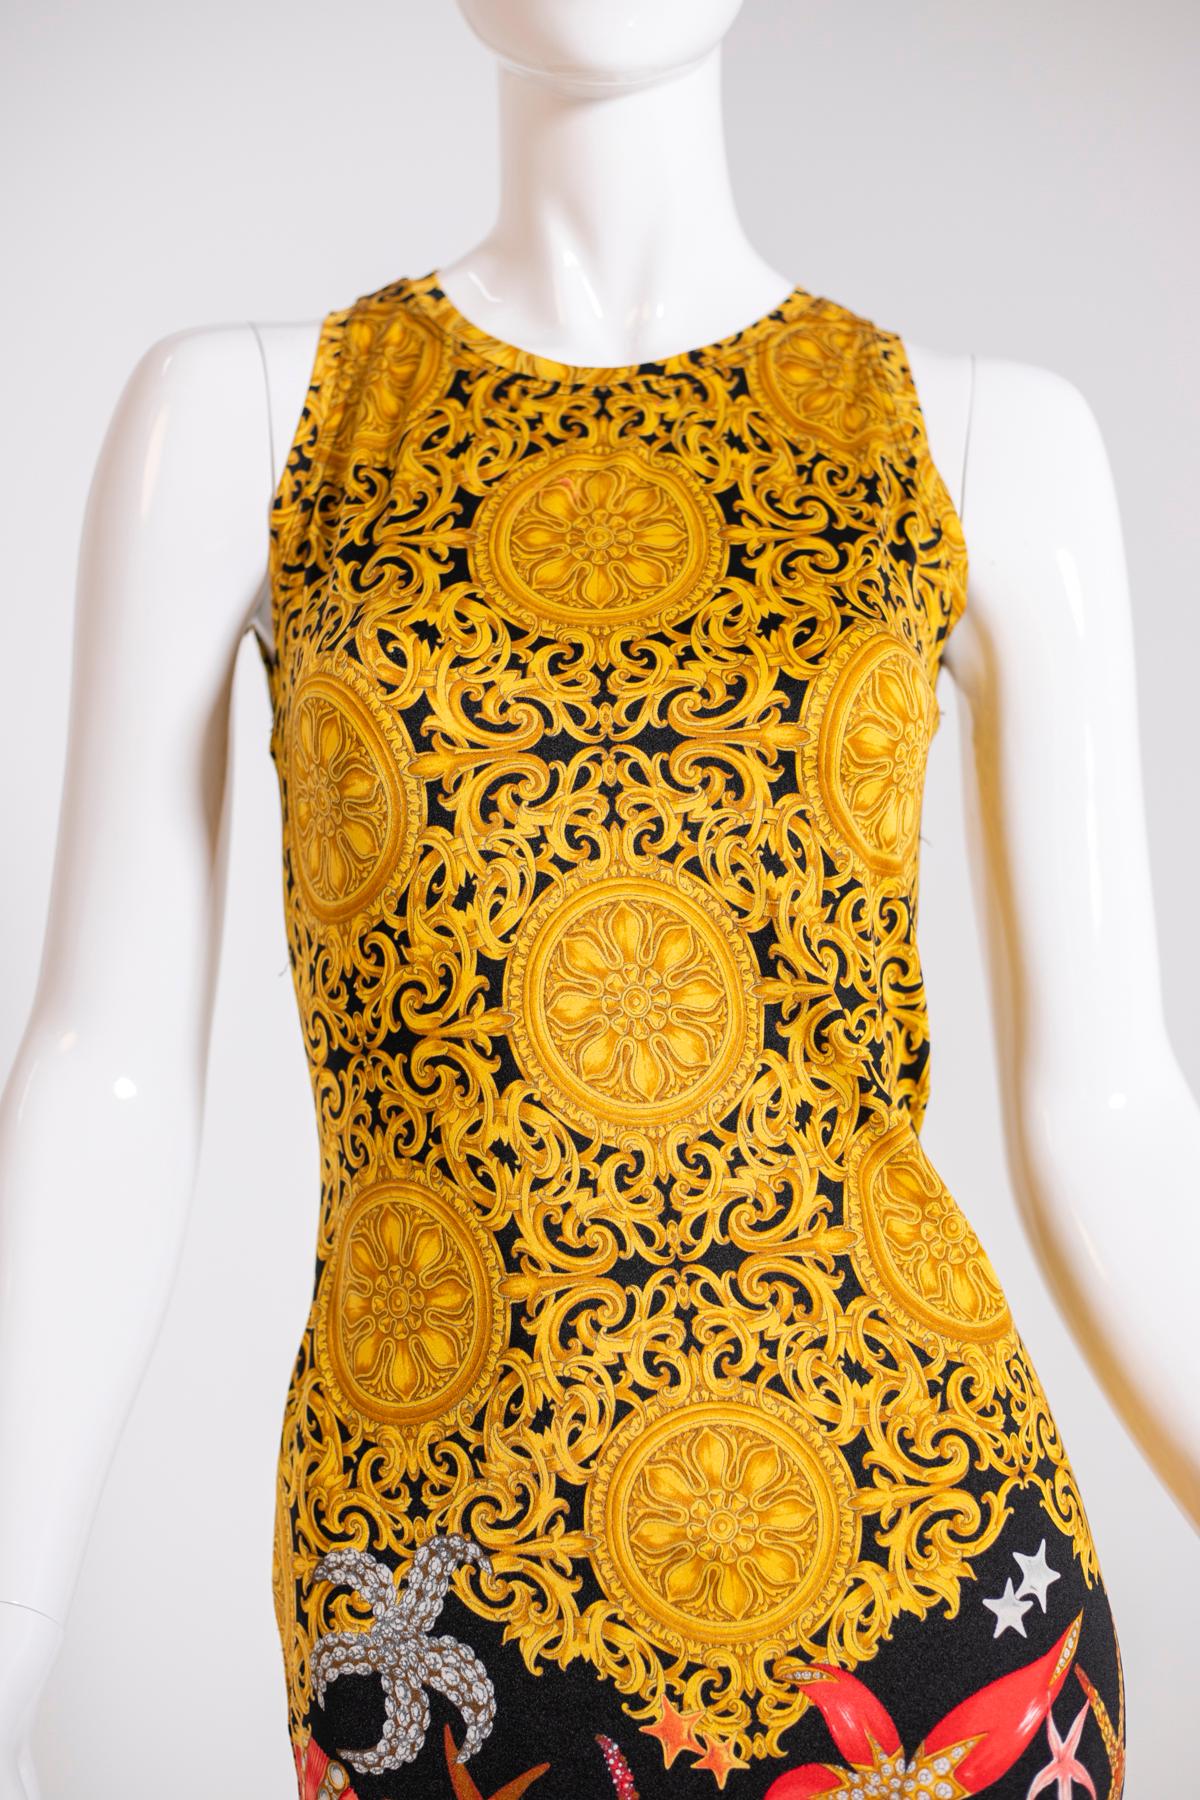 Gianni Versace Vintage S/S 1992 Baroque Fitted Dress  1